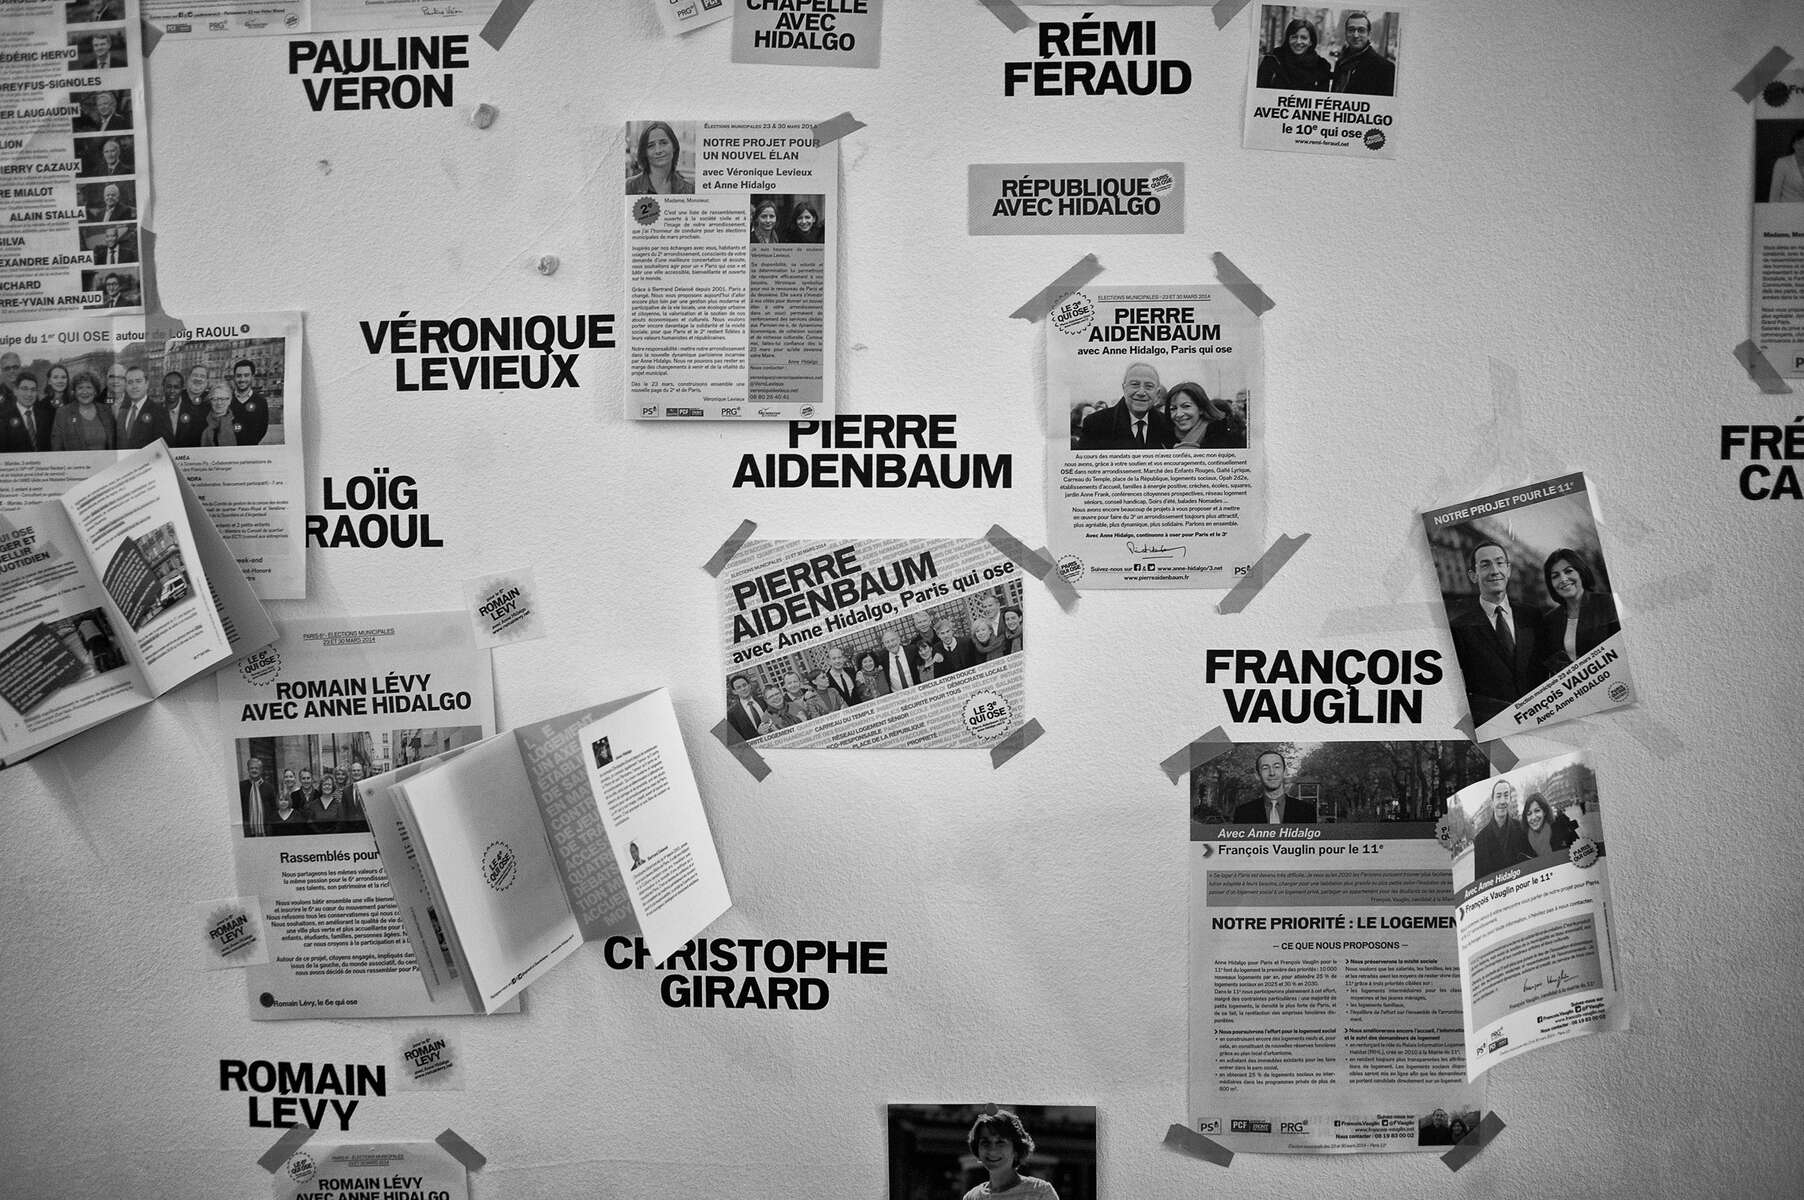 March 16, 2014.  PARIS, FRANCE- The walls of Anne Hidalgo's main headquarters in Paris' Bastille neighborhood have been heavily decorated by her young staffers.   For the first time in France's history, Paris will have a woman as a mayor - either Socialist Anne Hidalgo or Center-Right Nathalie Kosciusko-Morizet.  Photo by Scout Tufankjian